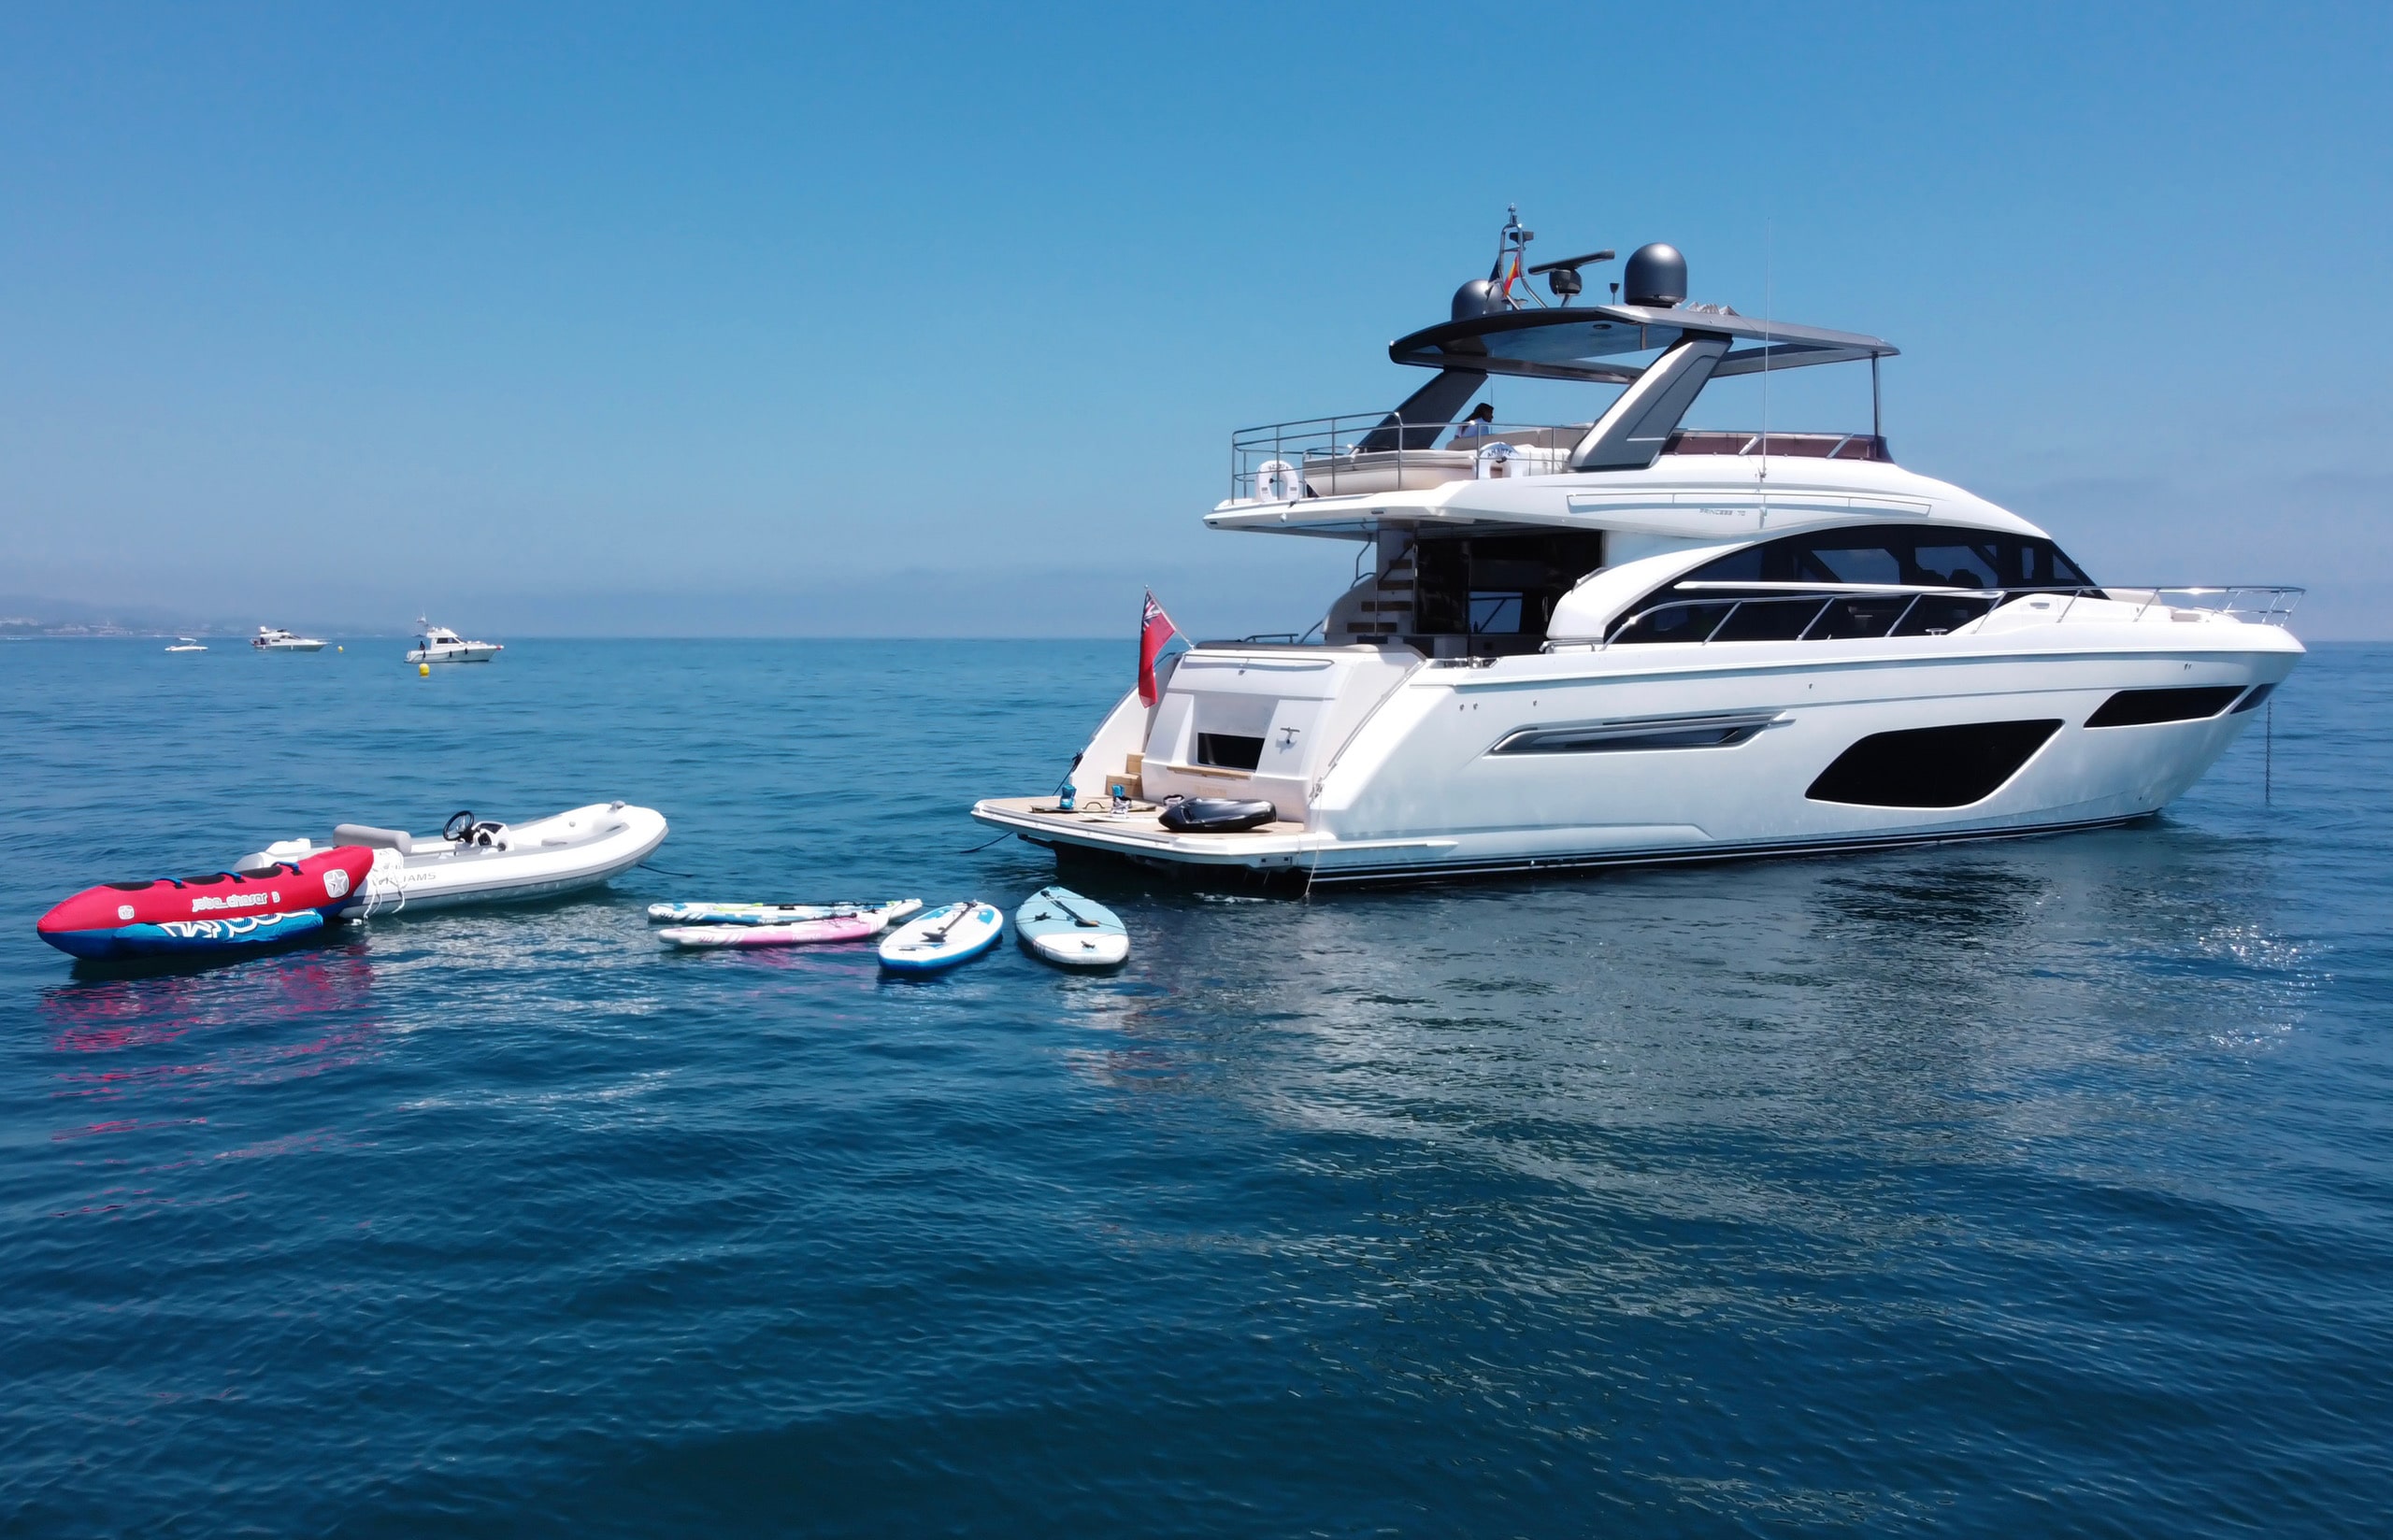 Sleek yachts with water toys for everyone